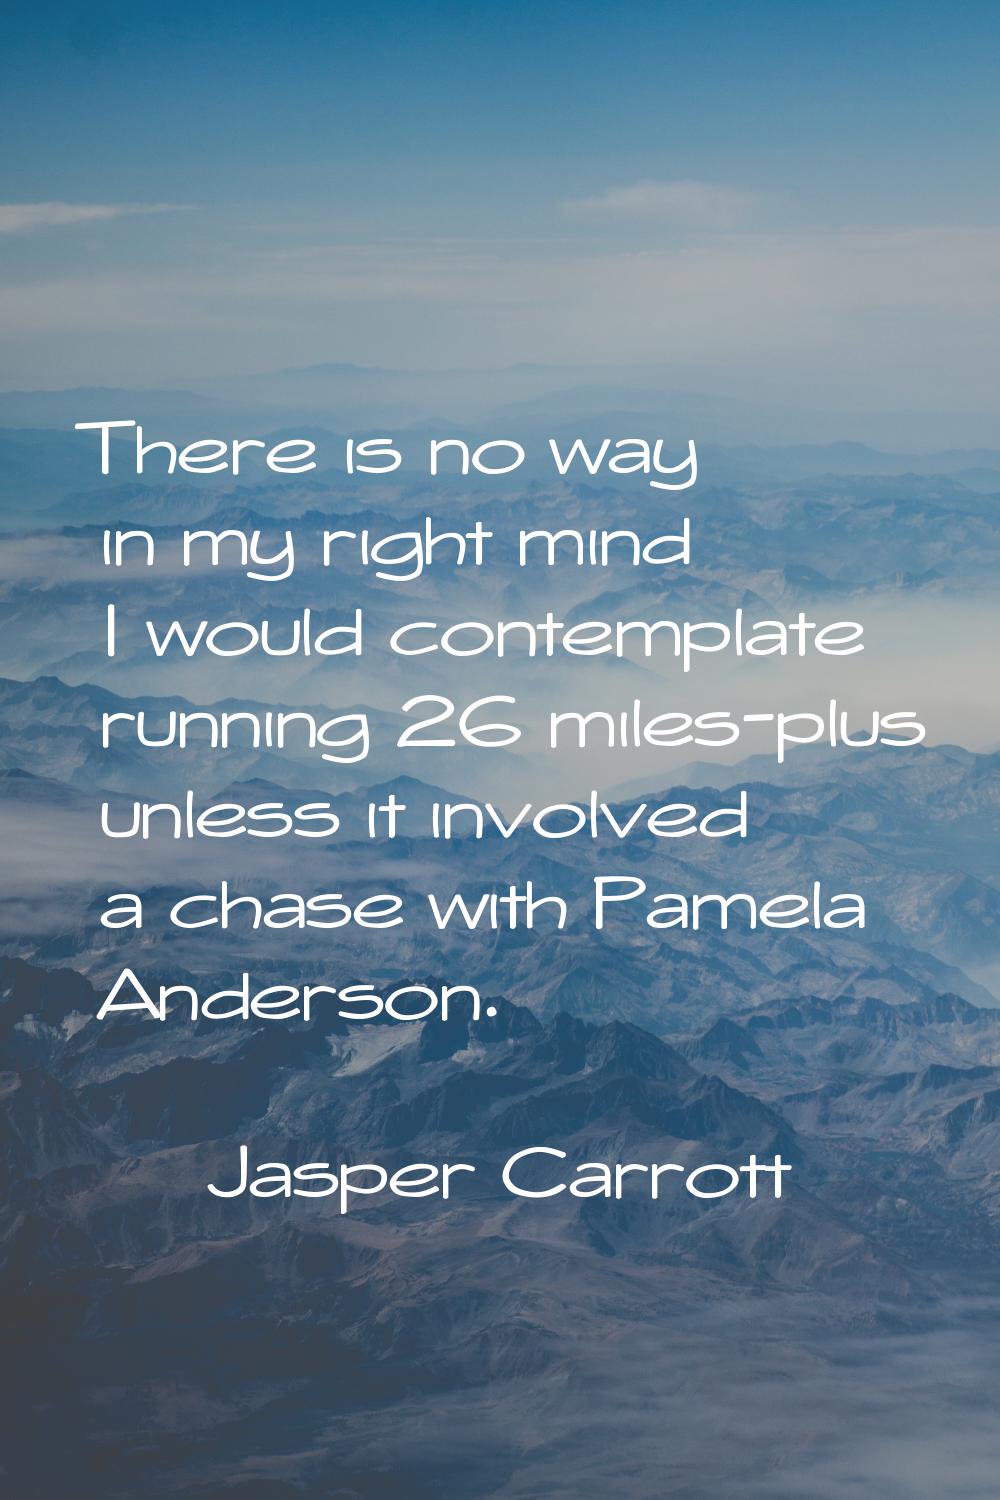 There is no way in my right mind I would contemplate running 26 miles-plus unless it involved a cha